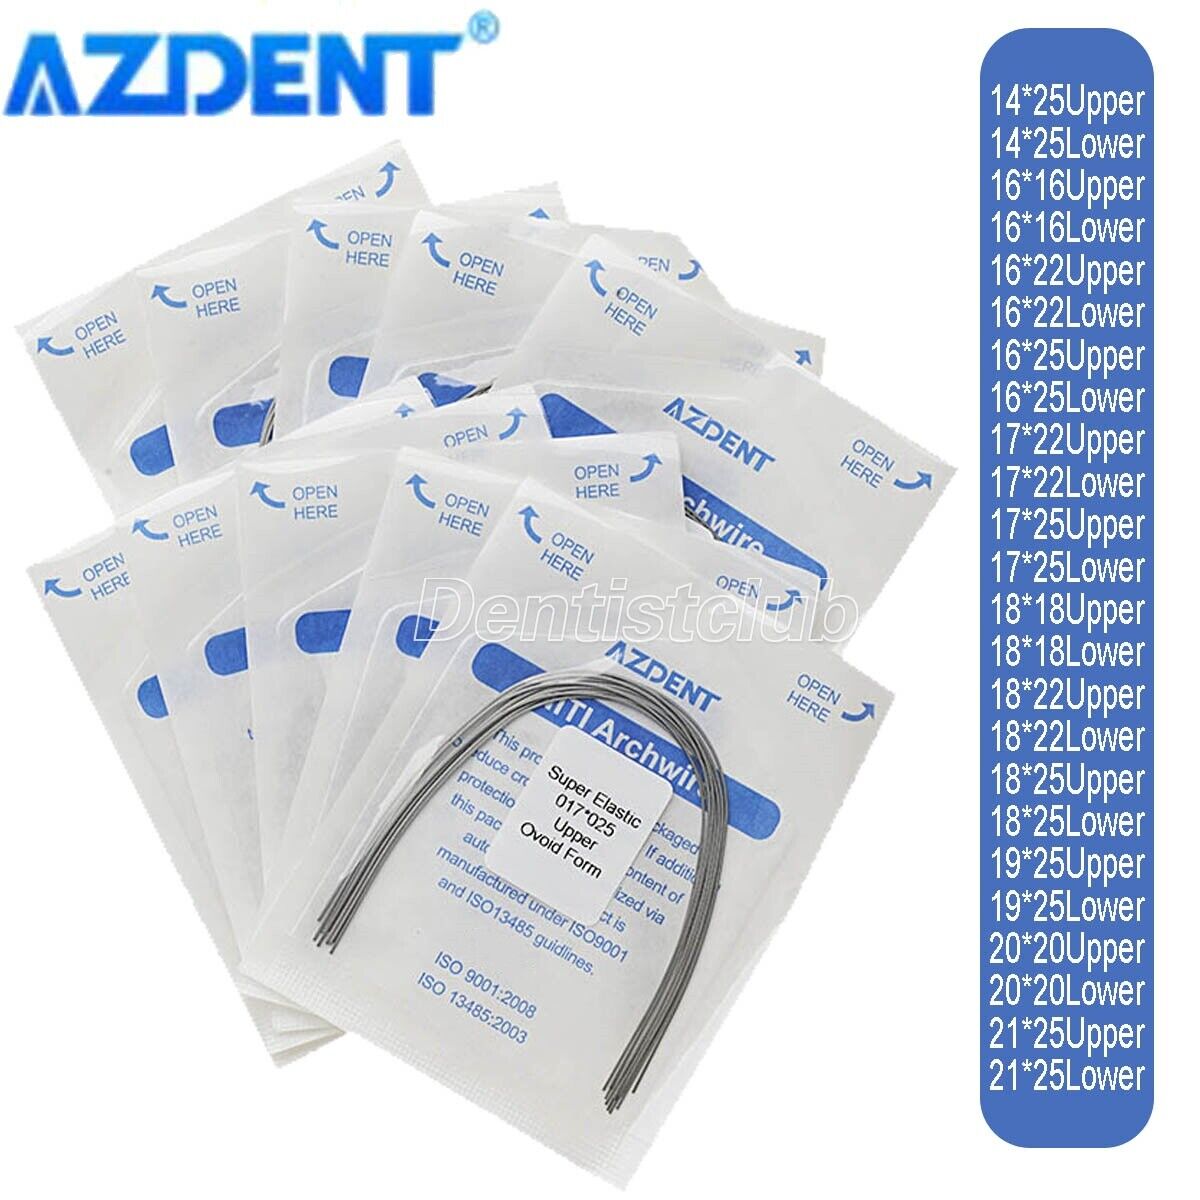 Dental Orthodontic Super Elastic Niti Arch Wires Rectangular Ovoid Form All Size